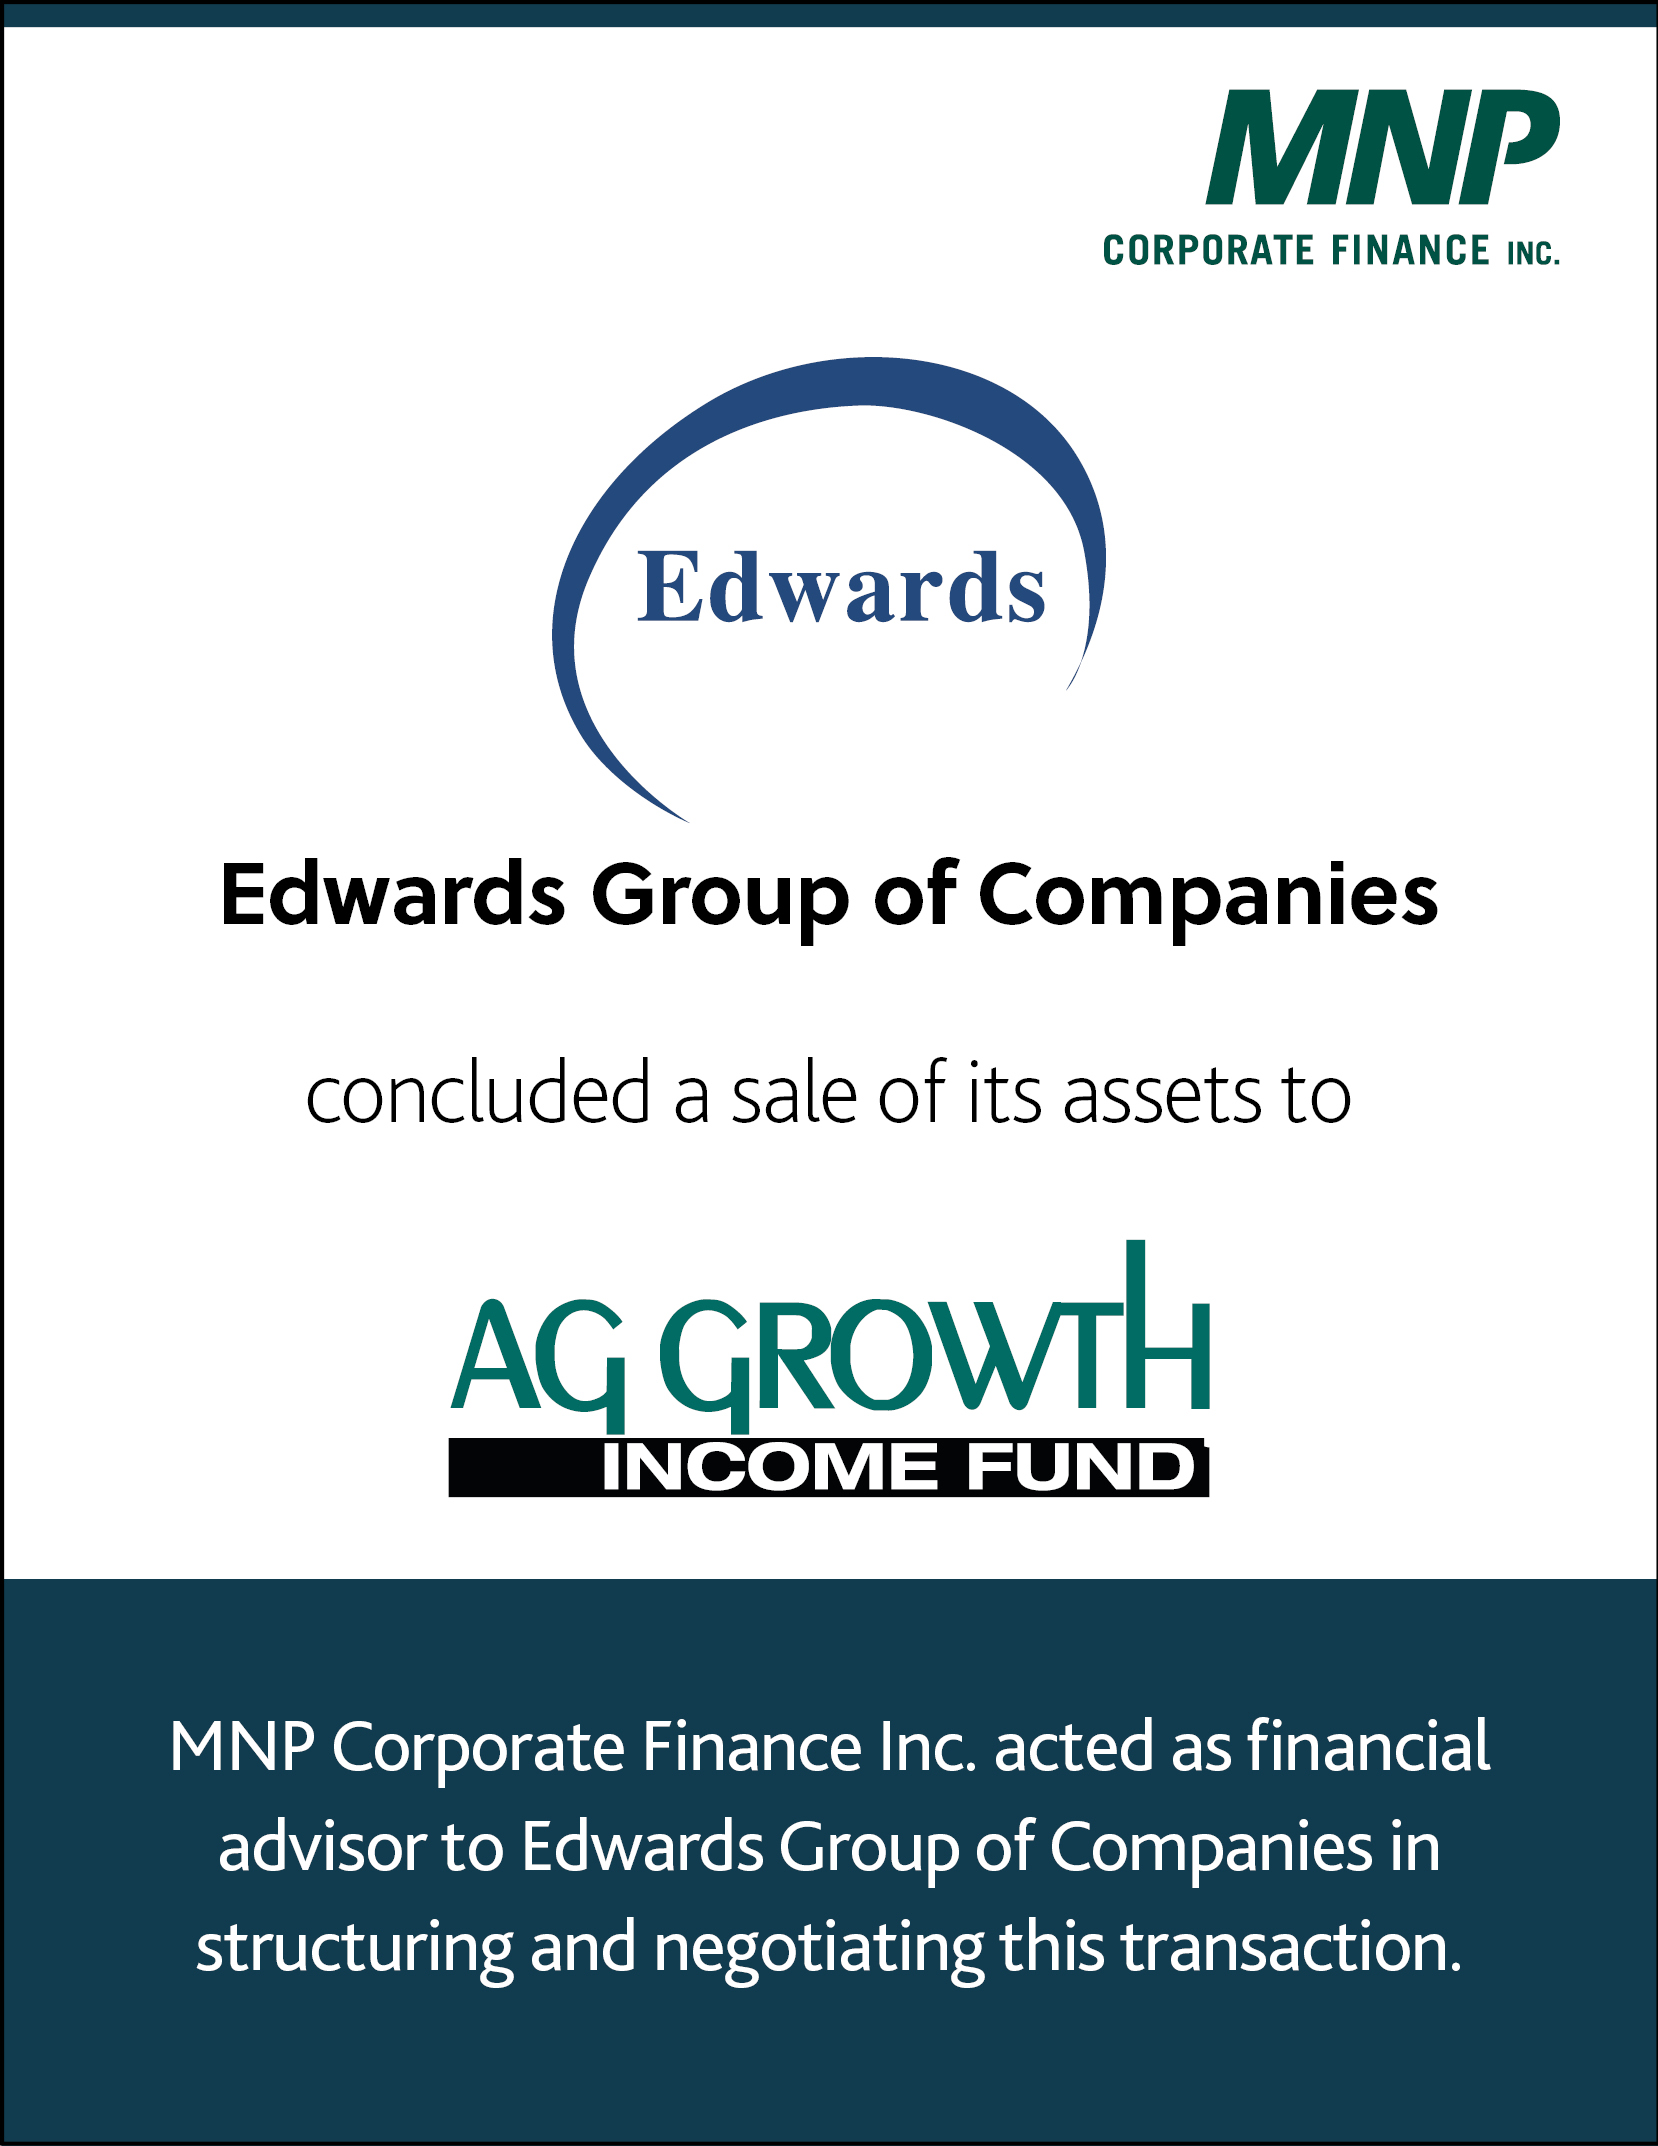 Edwards Group of Companies concluded a sale of its assets to Ag Growth Income Fund